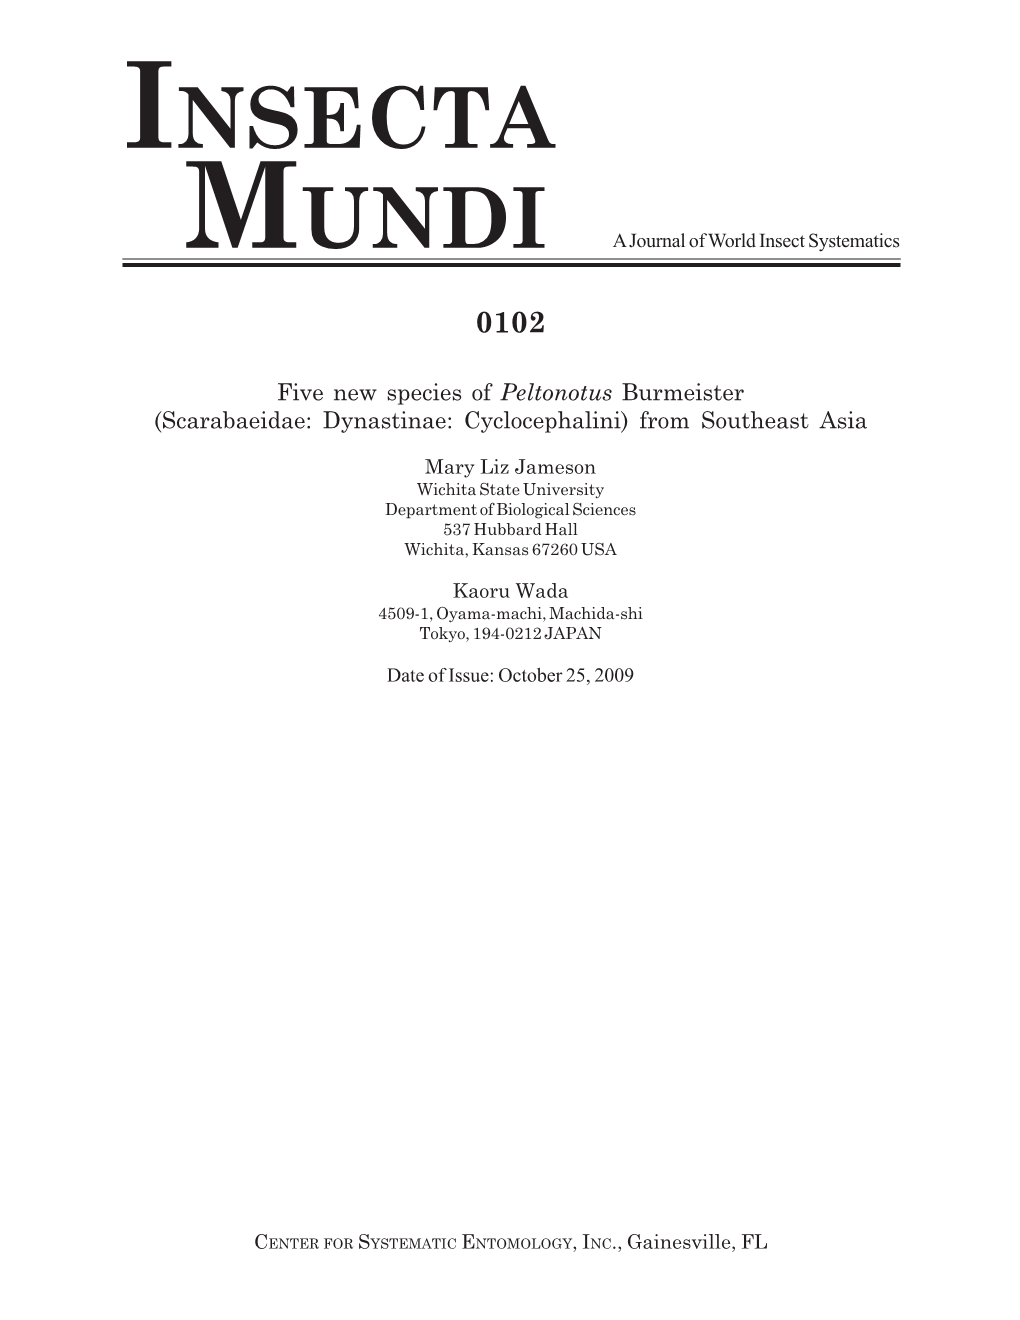 INSECTA MUNDI a Journal of World Insect Systematics